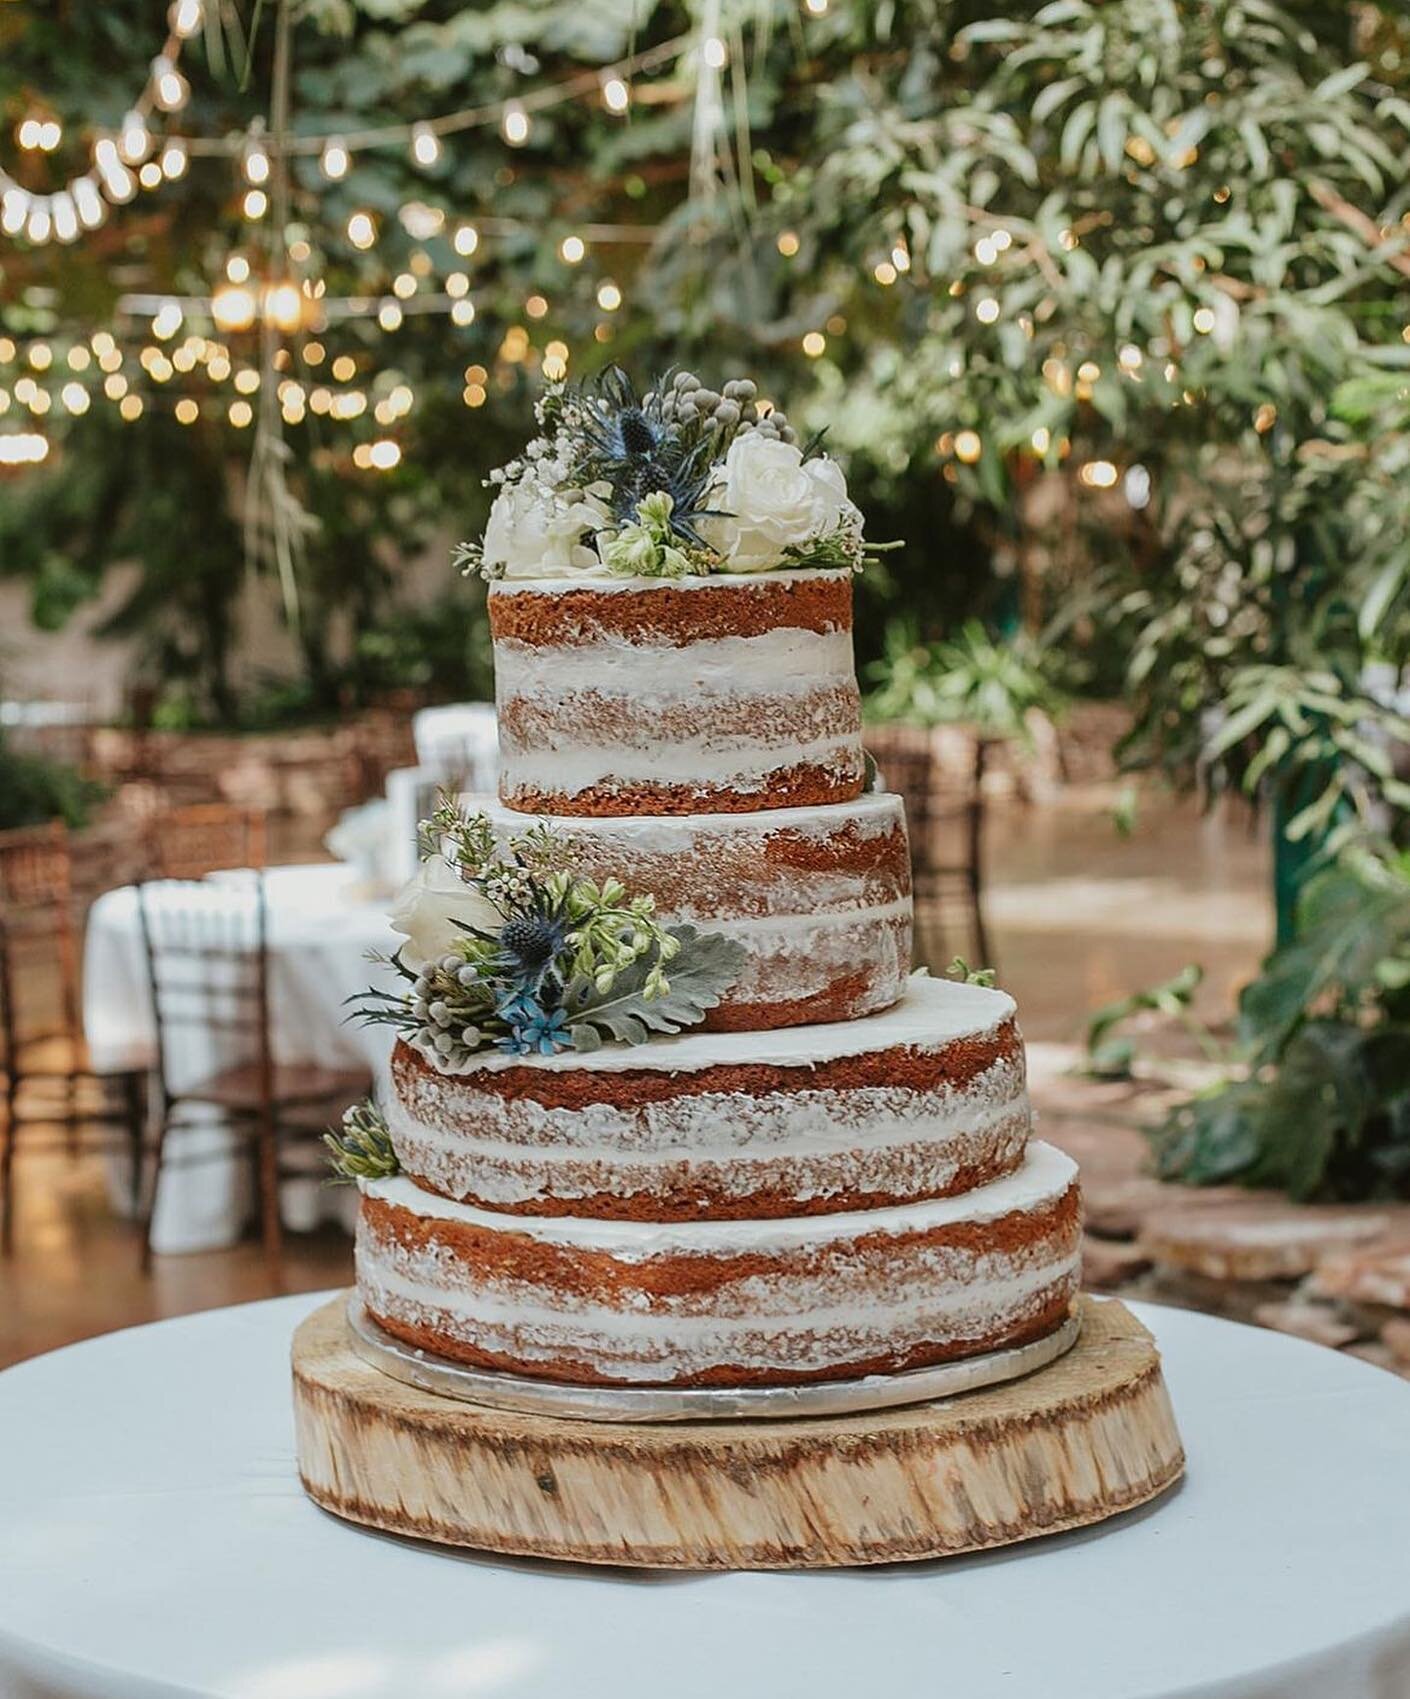 &ldquo;Today was so wonderful, even our cake was in tiers.&rdquo;

photo: @gracelundfilm 

#weddingcake #weddingcakeutah #weddingcaledesign
#utahwedding #utah #weddingvenue #receptionvenue #receptionvenueutah #weddingvenueutah #weddingvenueutahcounty